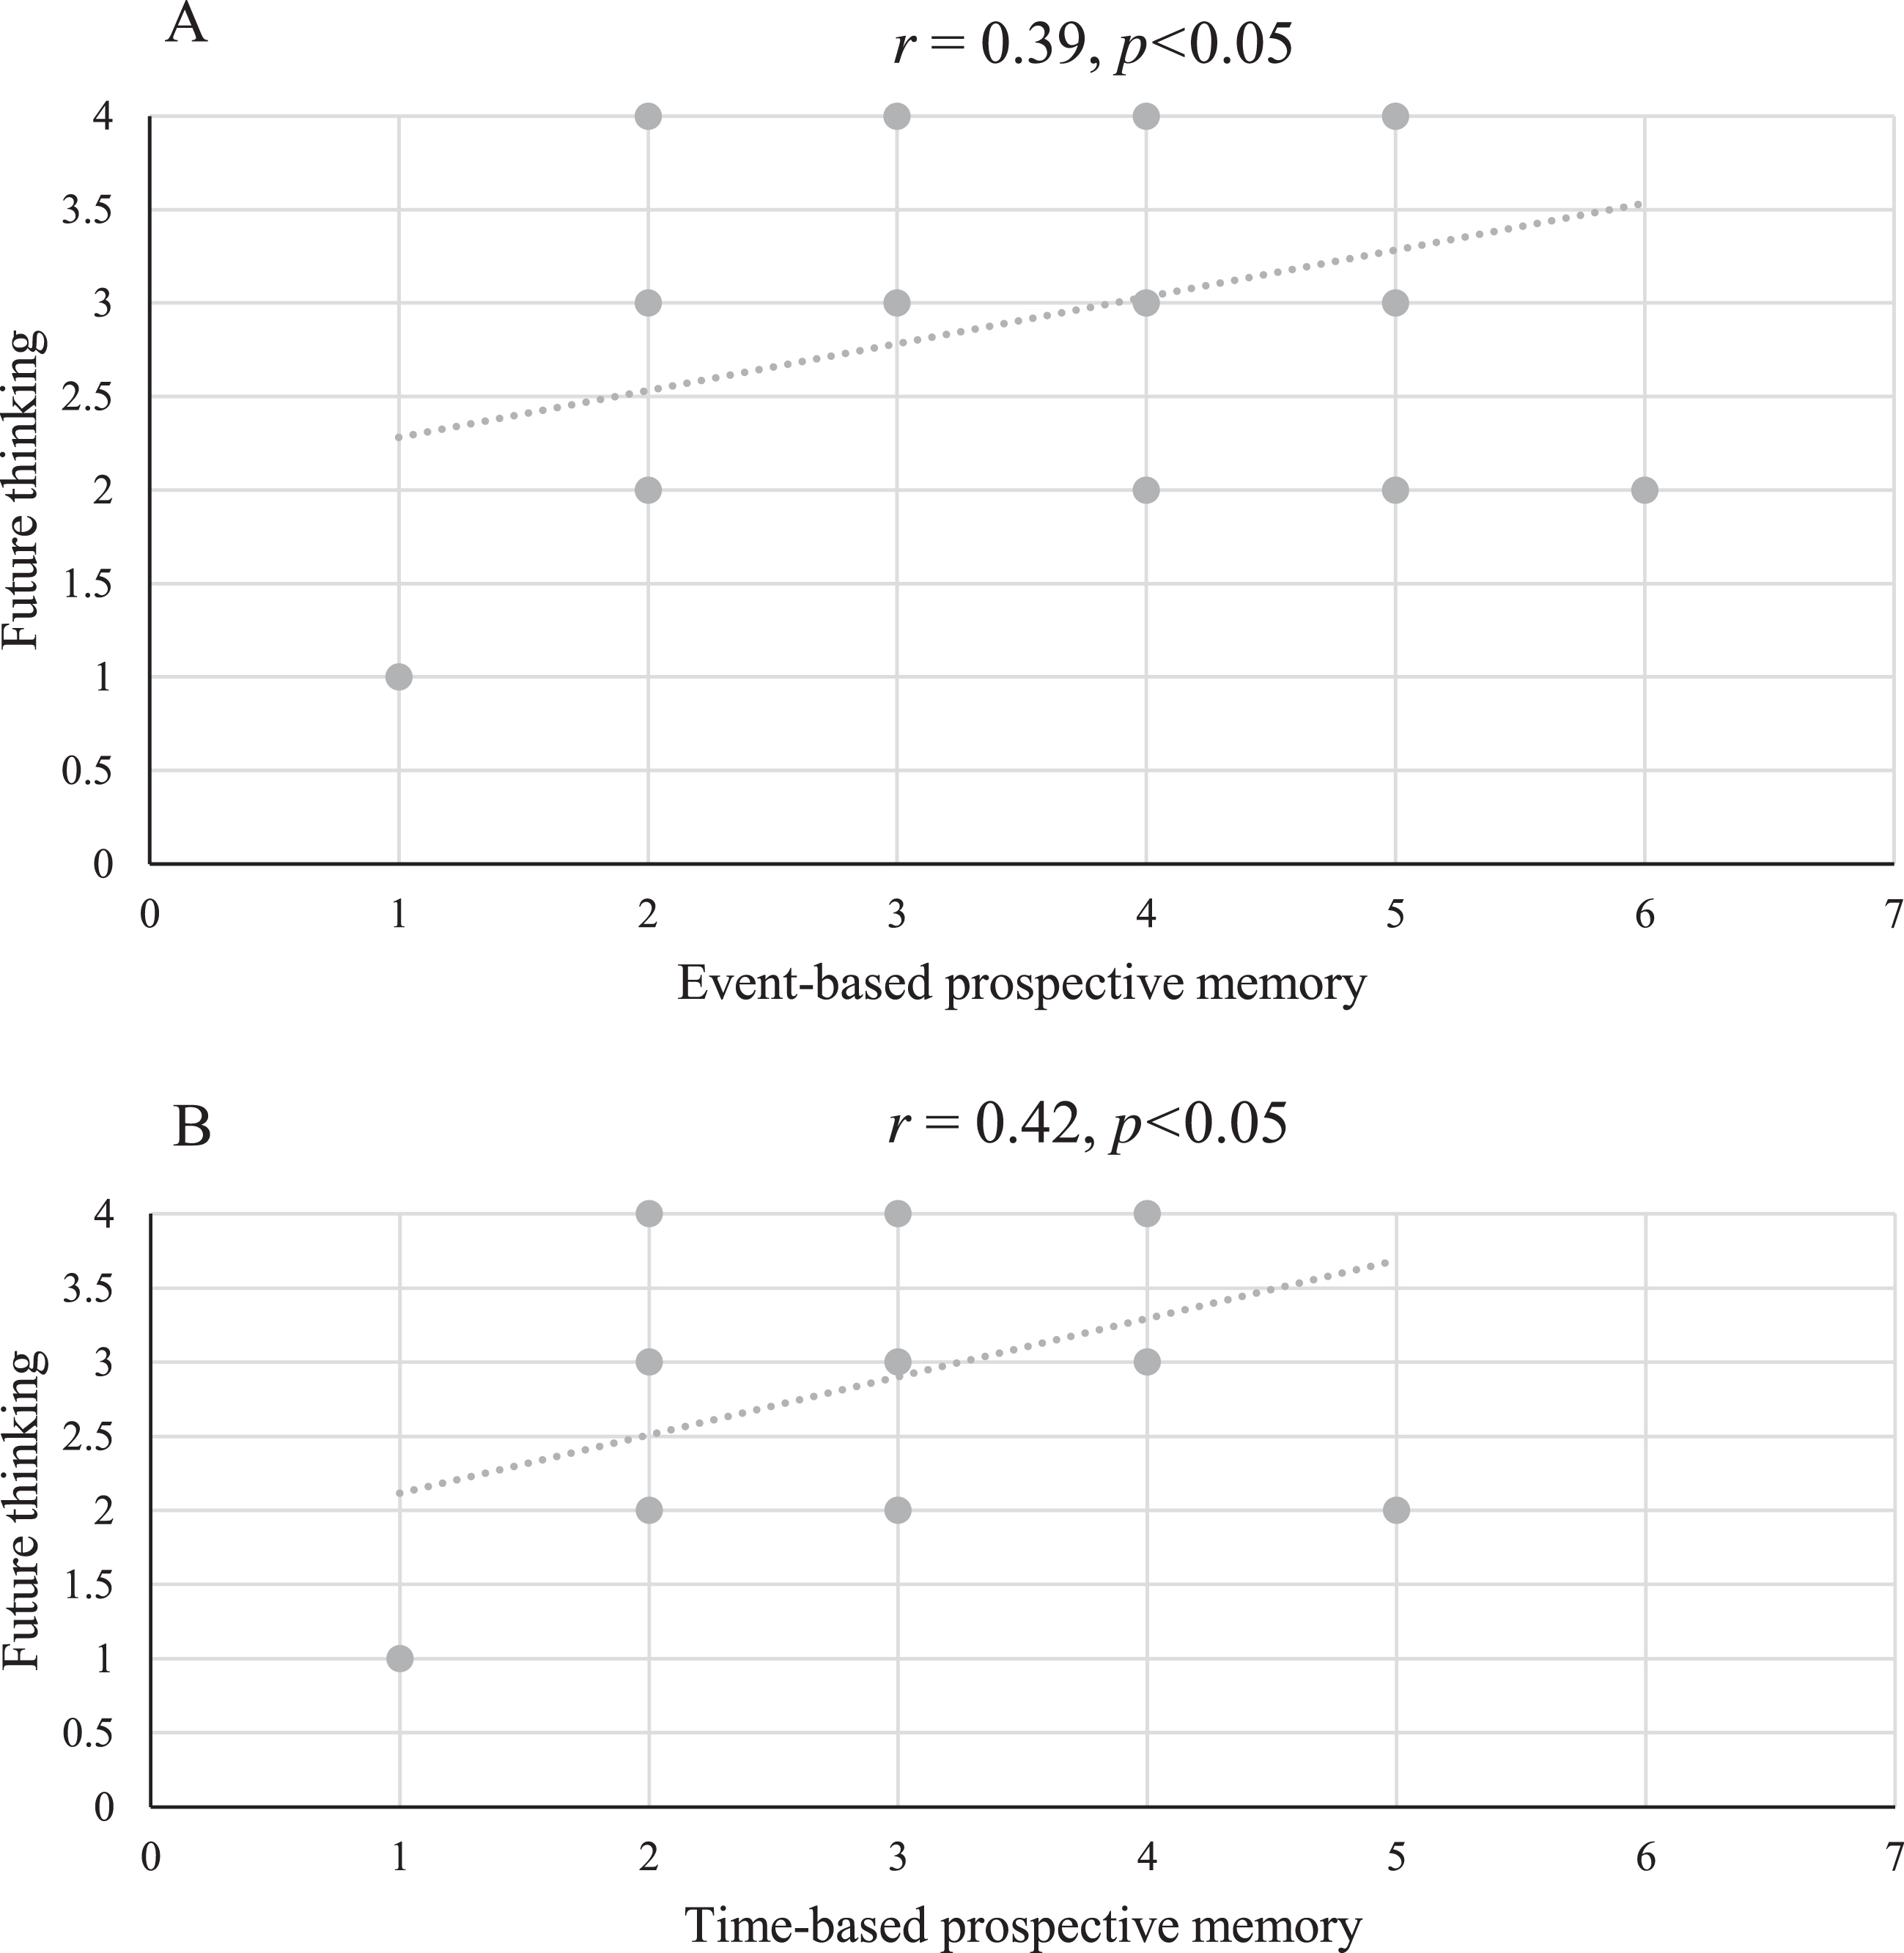 Correlations between event-based prospective memory and future thinking (A) and time-based and future thinking (B) in Alzheimer’s disease participants.